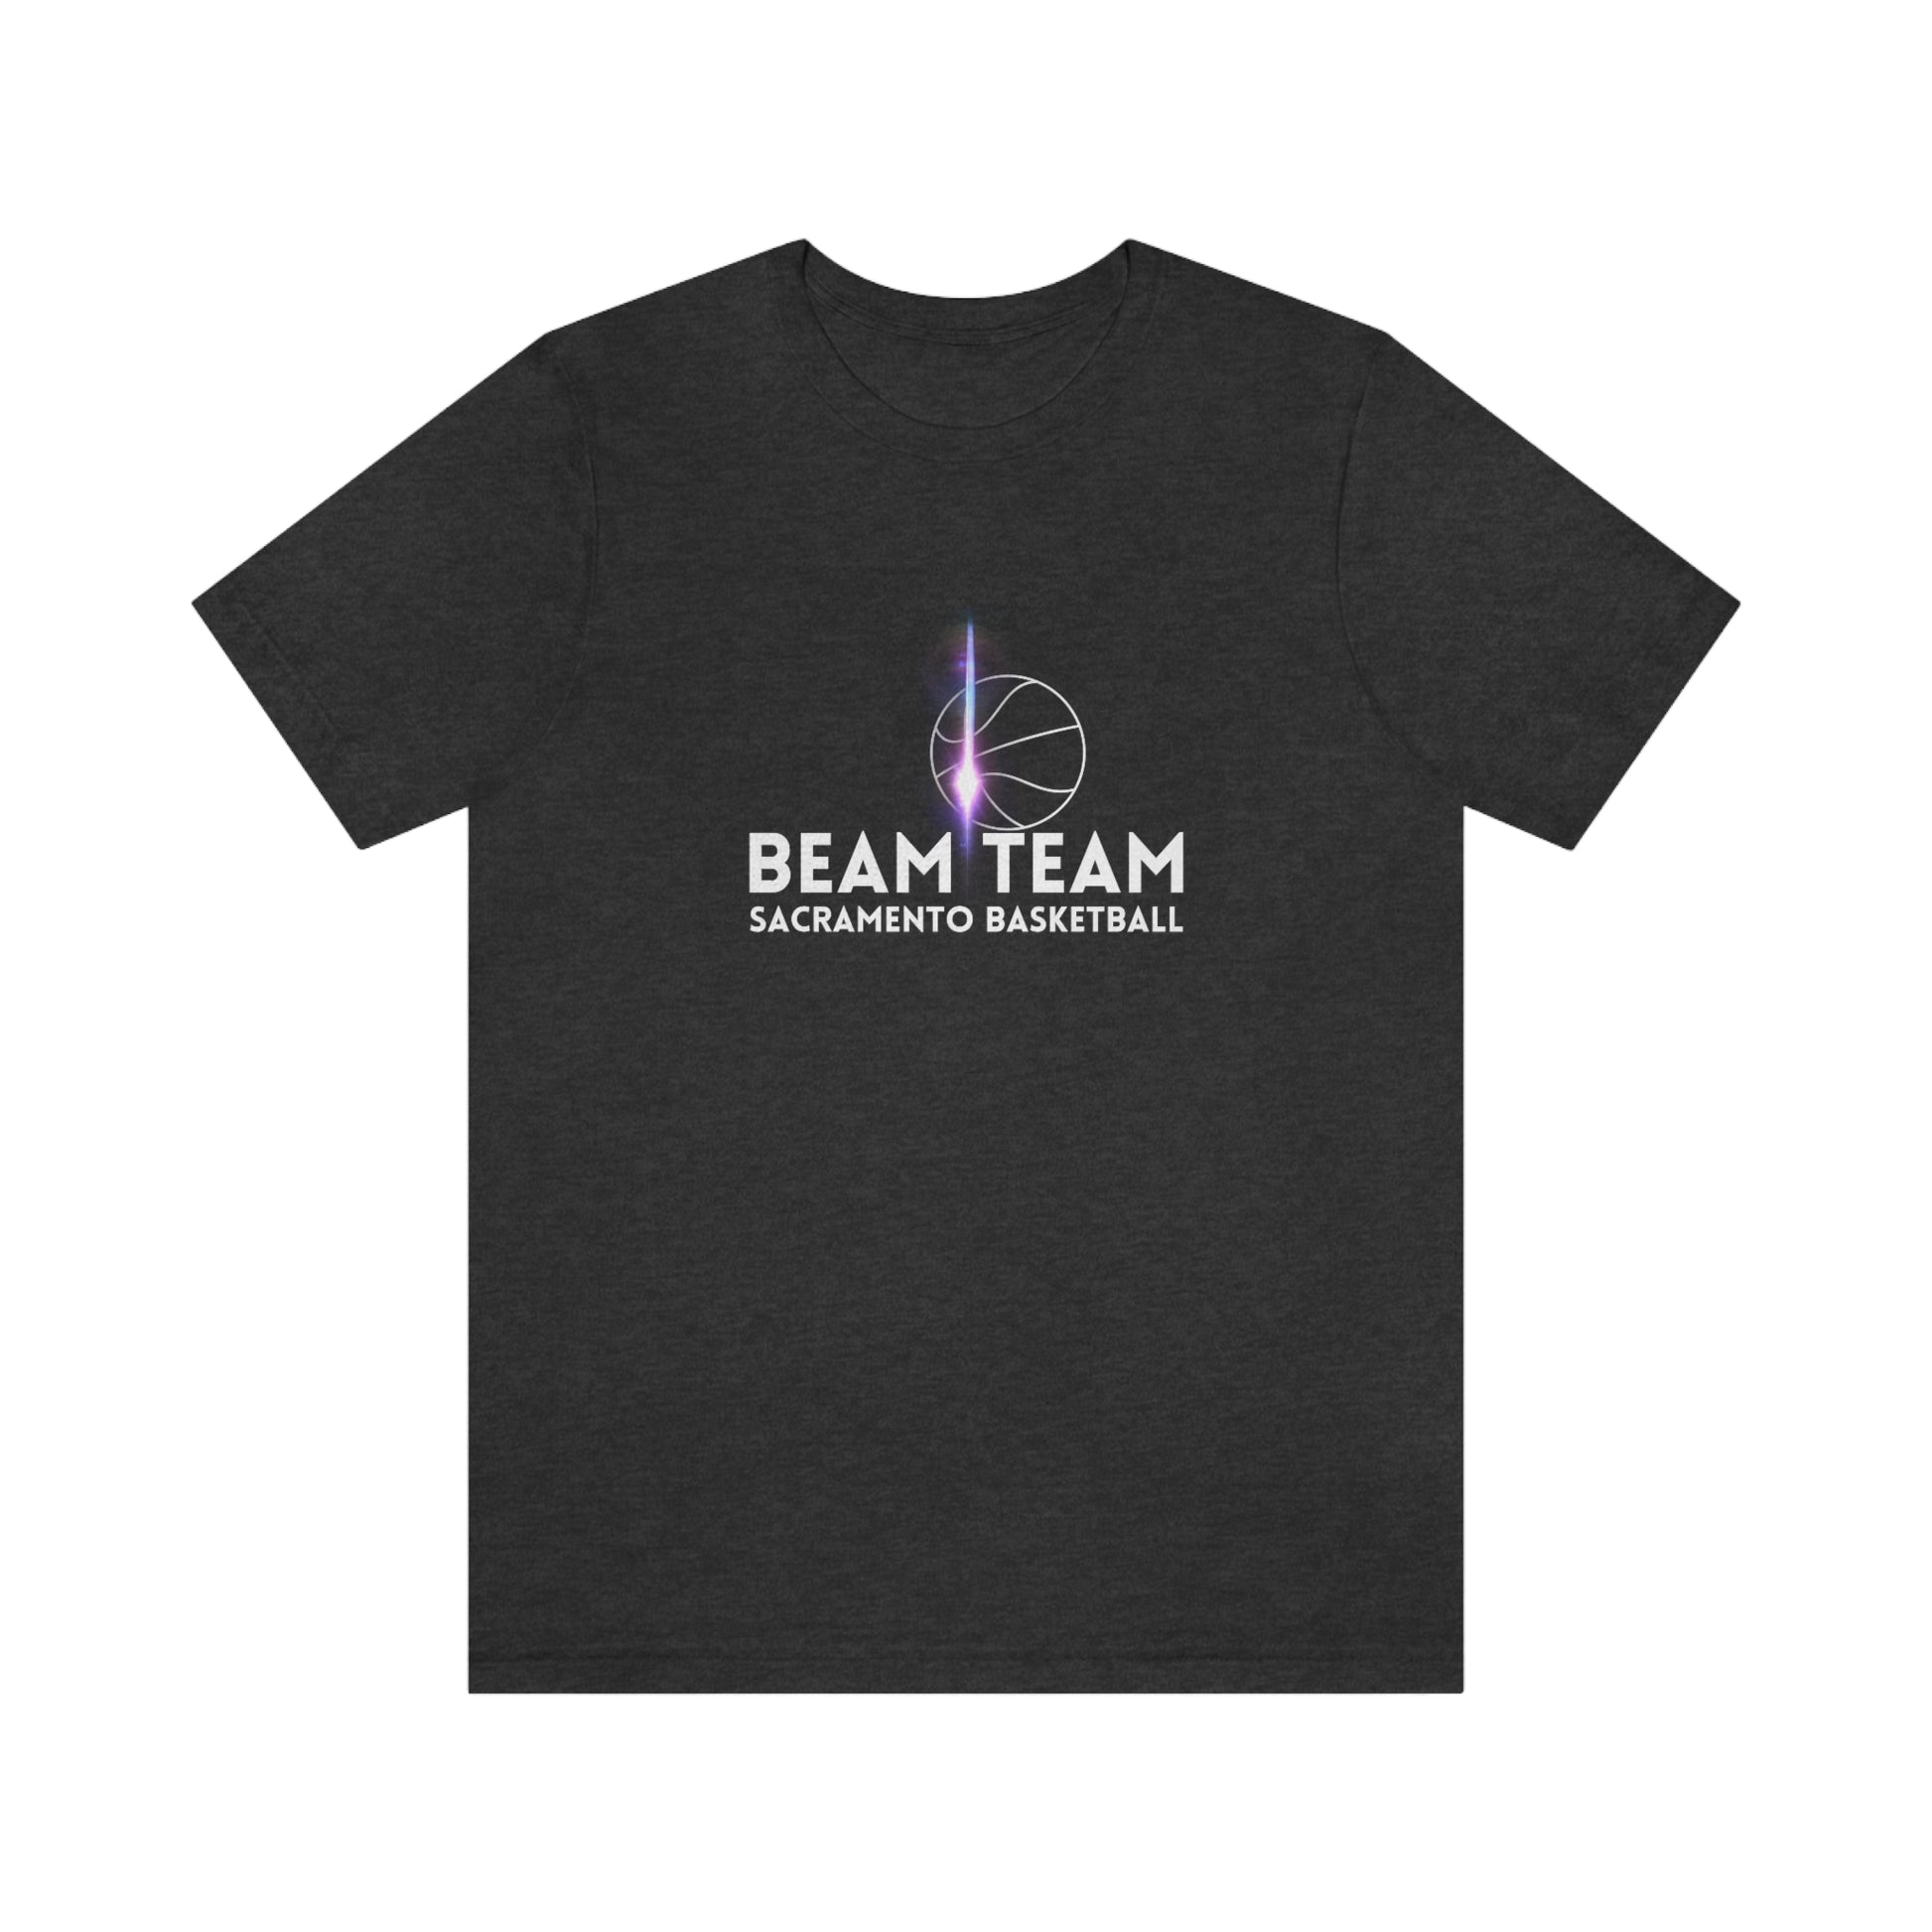 Beam Team Kings Basketball, Unisex T-Shirt, Sacramento Basketball Gift, Kings Team Fan Gift, Sacramento Basketball Team Fan Gift,Beam Team, Light the Beam! Celebrate another W - win - for your Kings Basketball team in this comfortable, cool t-shirt. Perfect to sport at the game or show off the day after another W. It's going to be an epic season for our Sacramento Basketball team - show off your Sac Beam Team pride.